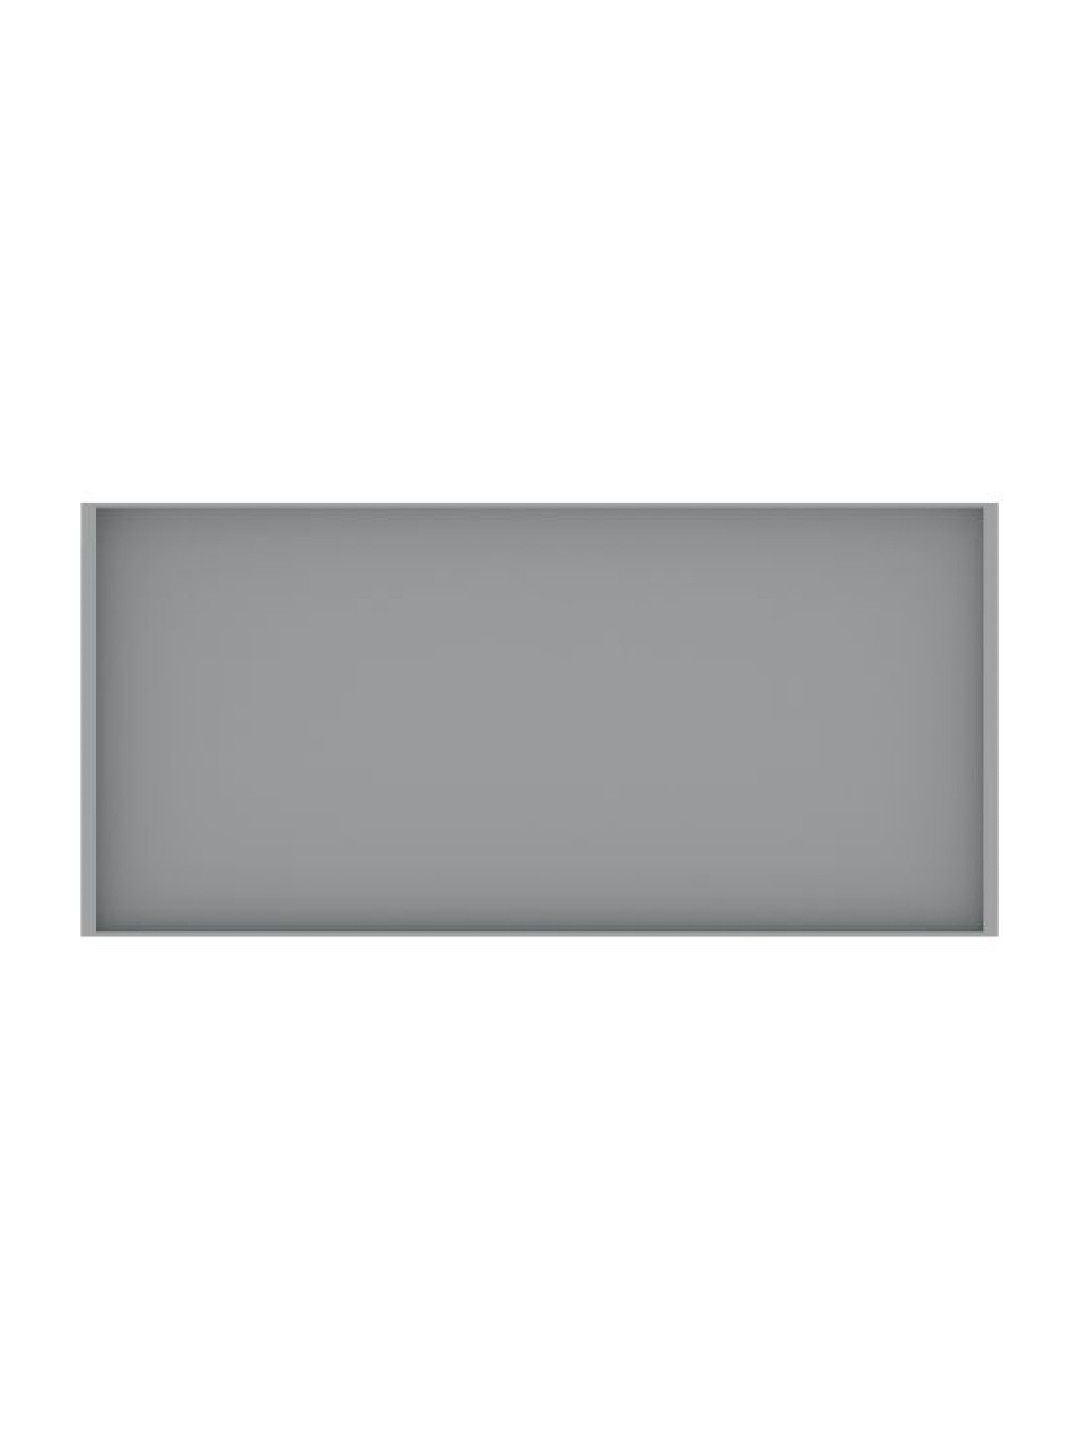 Sunbeams Lifestyle Gray Label Premium Monitor Stand (No Color- Image 4)